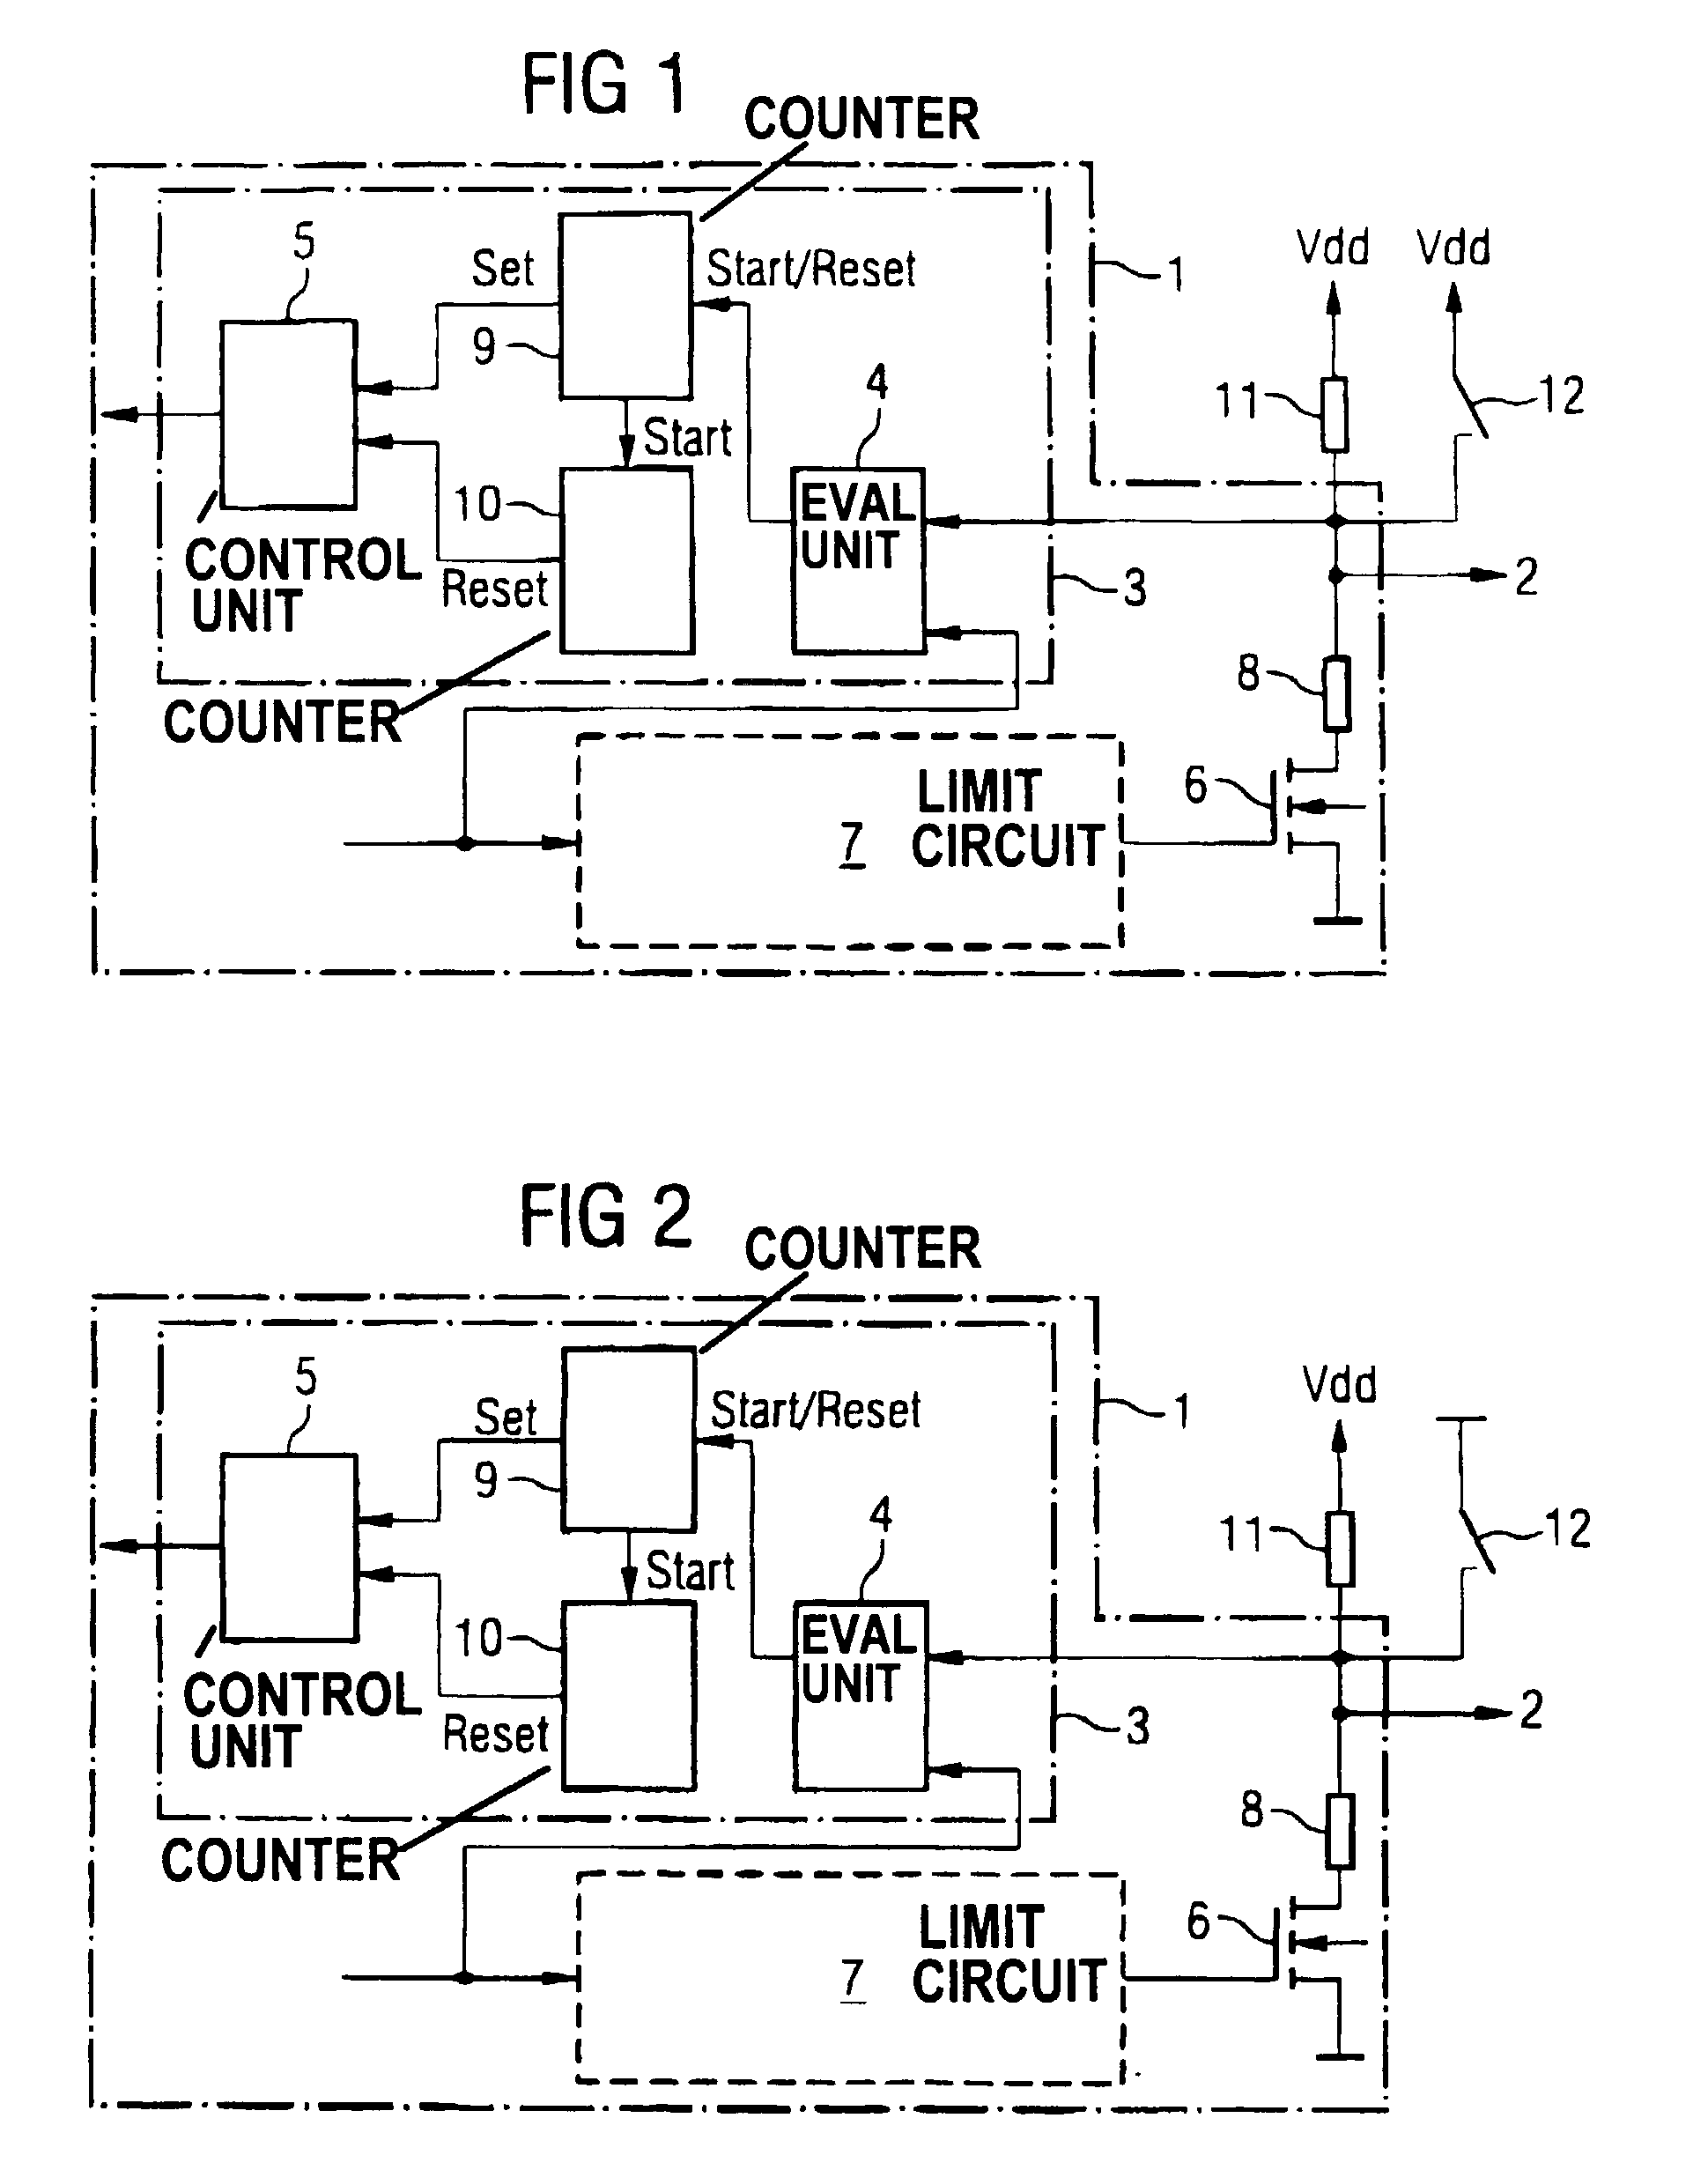 Method for switching from a first operating condition of an integrated circuit to a second operating condition of the integrated circuit